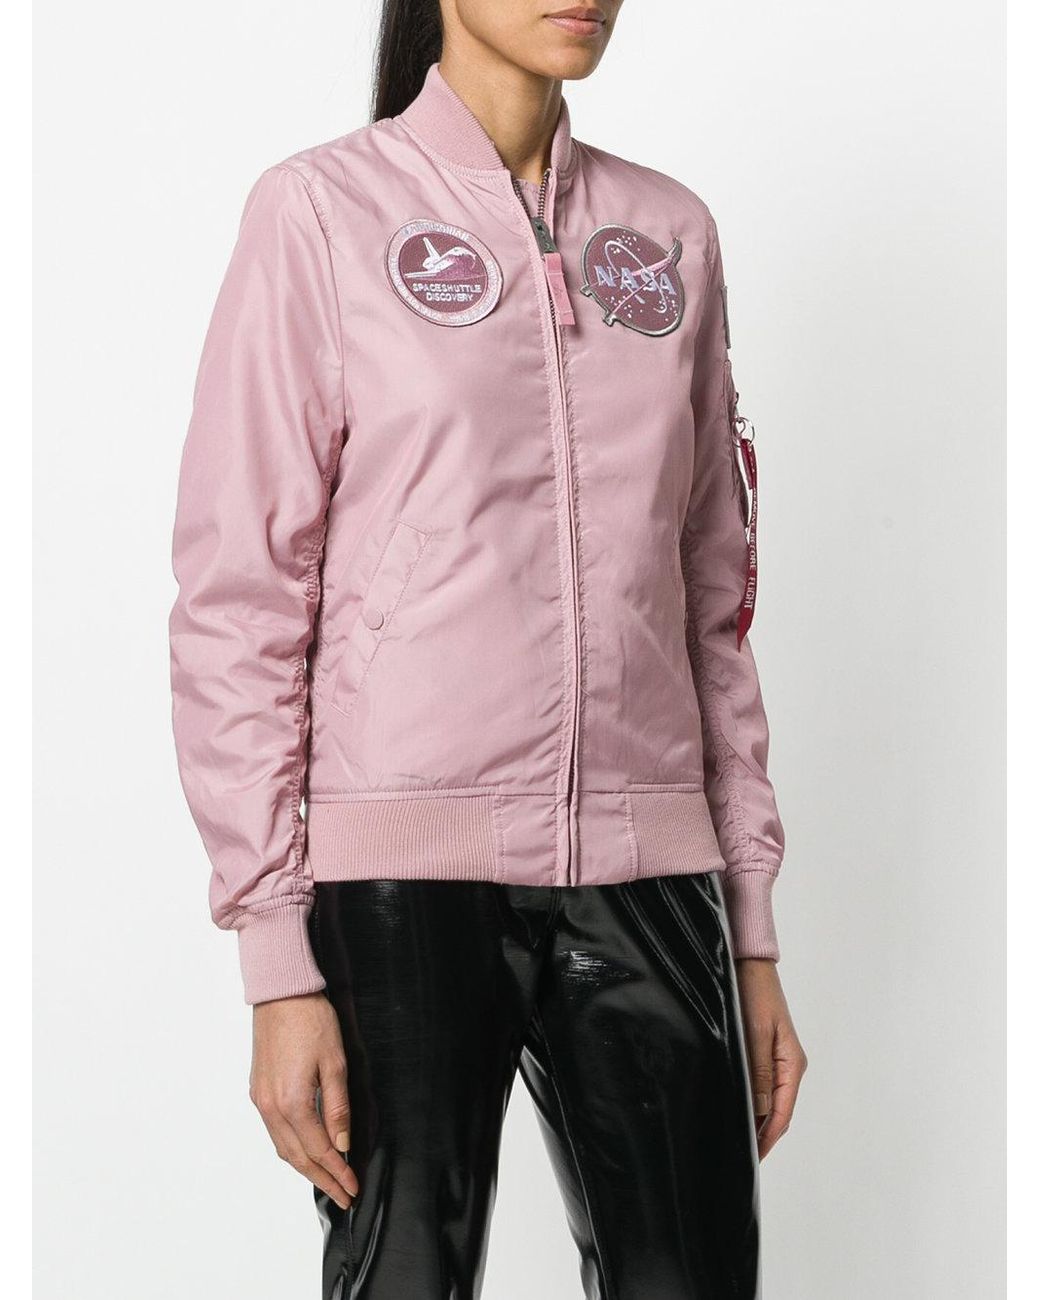 Alpha Industries Nasa Bomber Jacket in Pink | Lyst